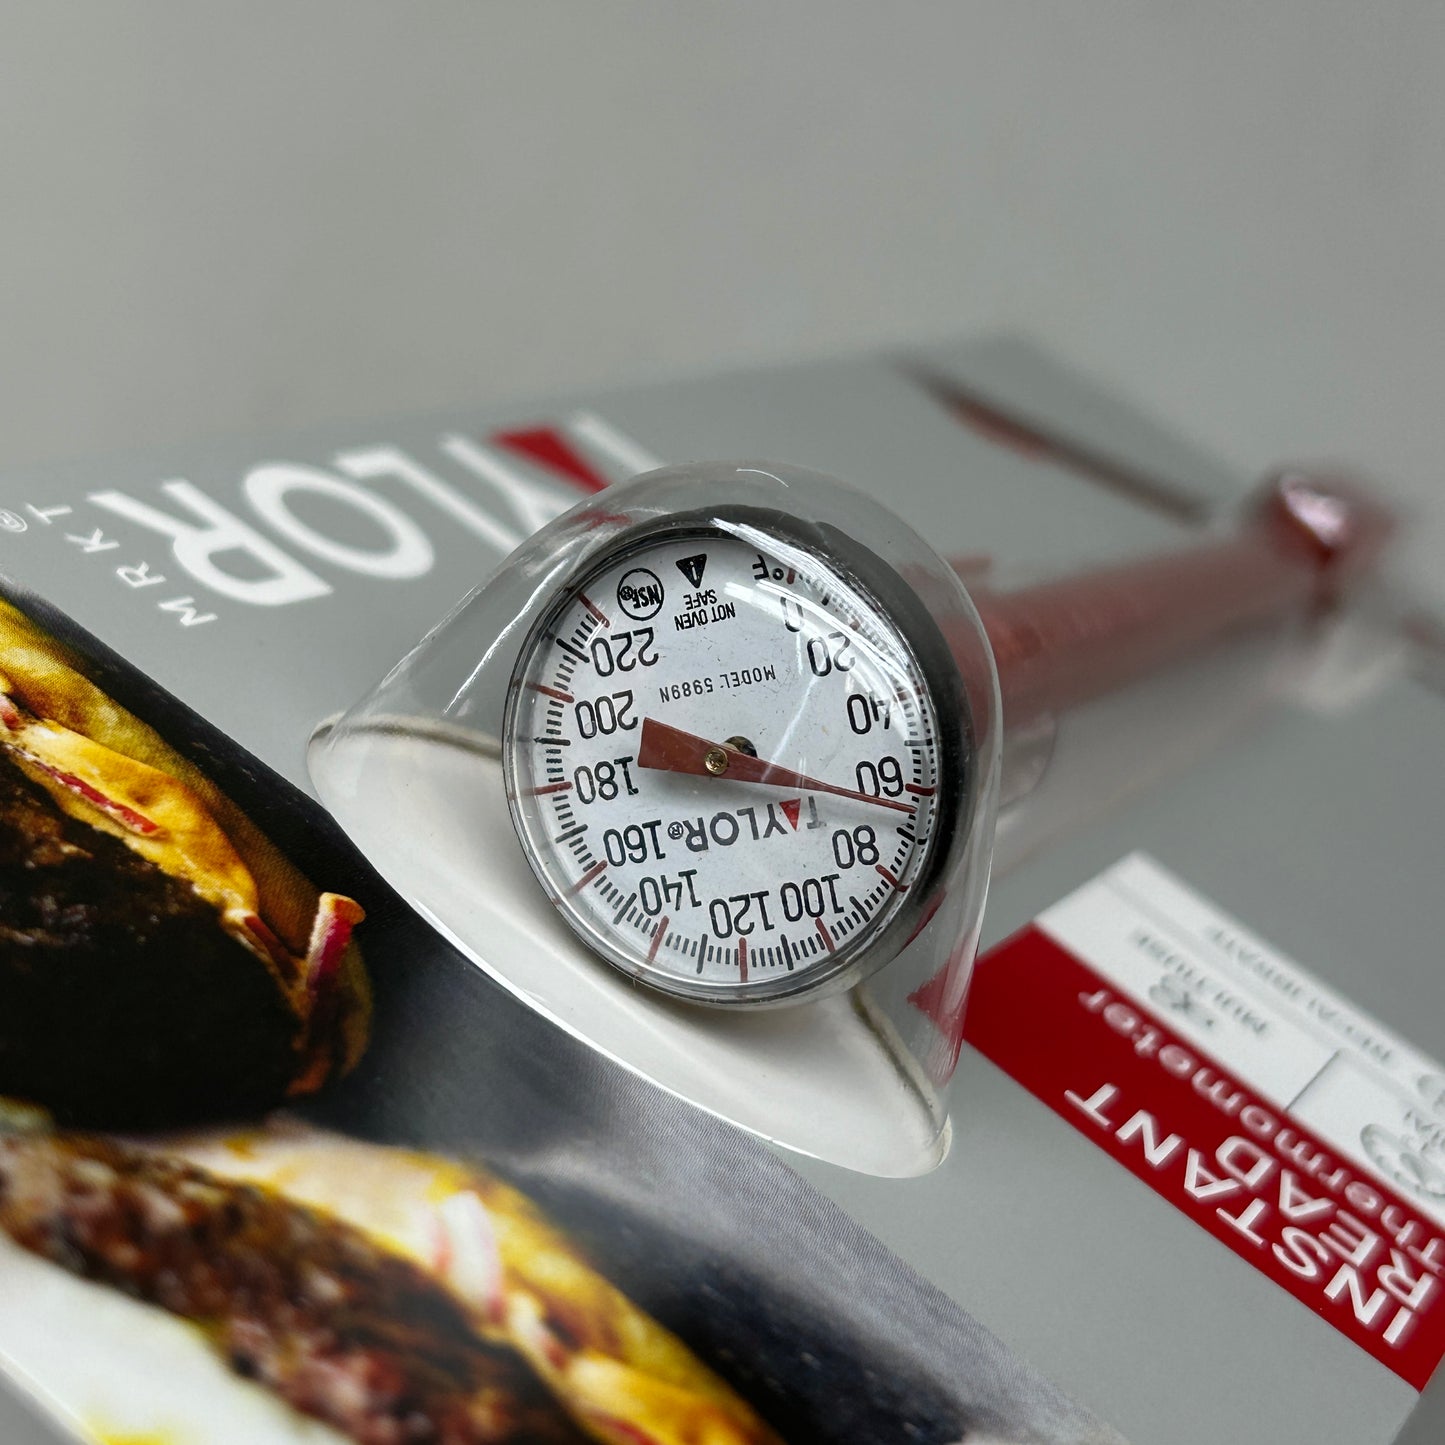 TAYLOR (2 PACK) Instant Read Thermometer With Sleeve Red 5989N (New)